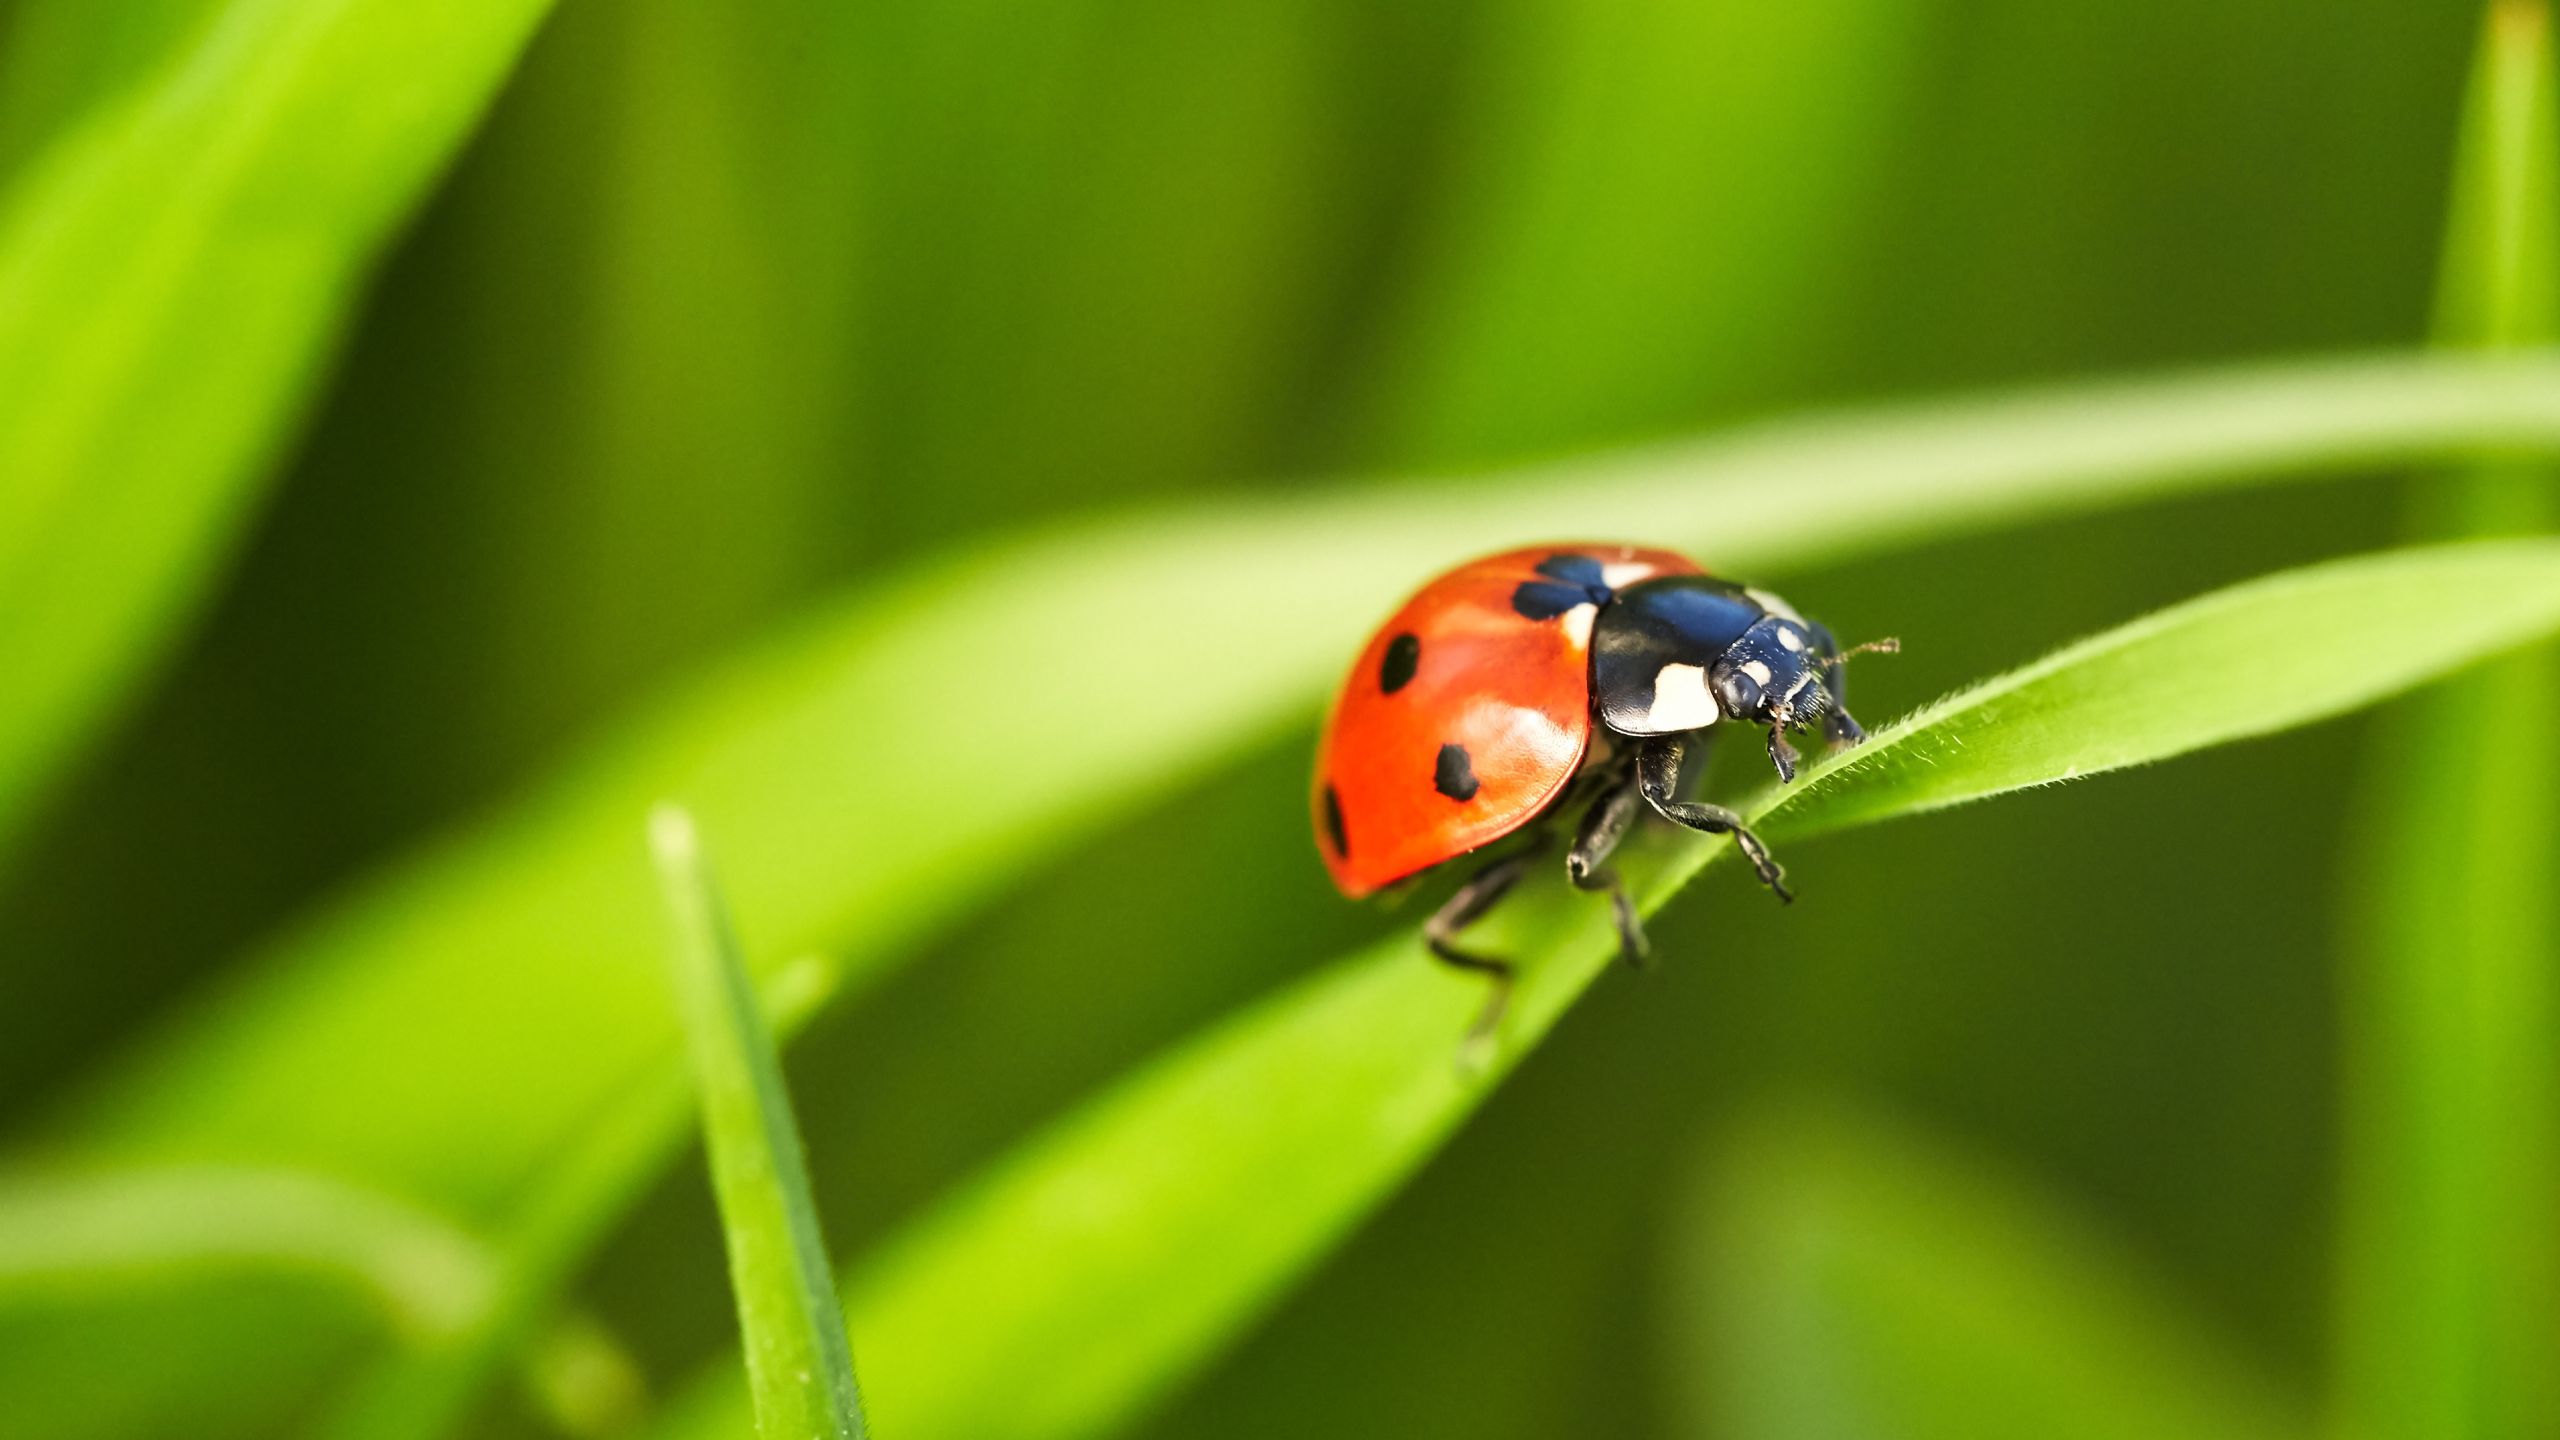 Ladybird clinging to the grass.